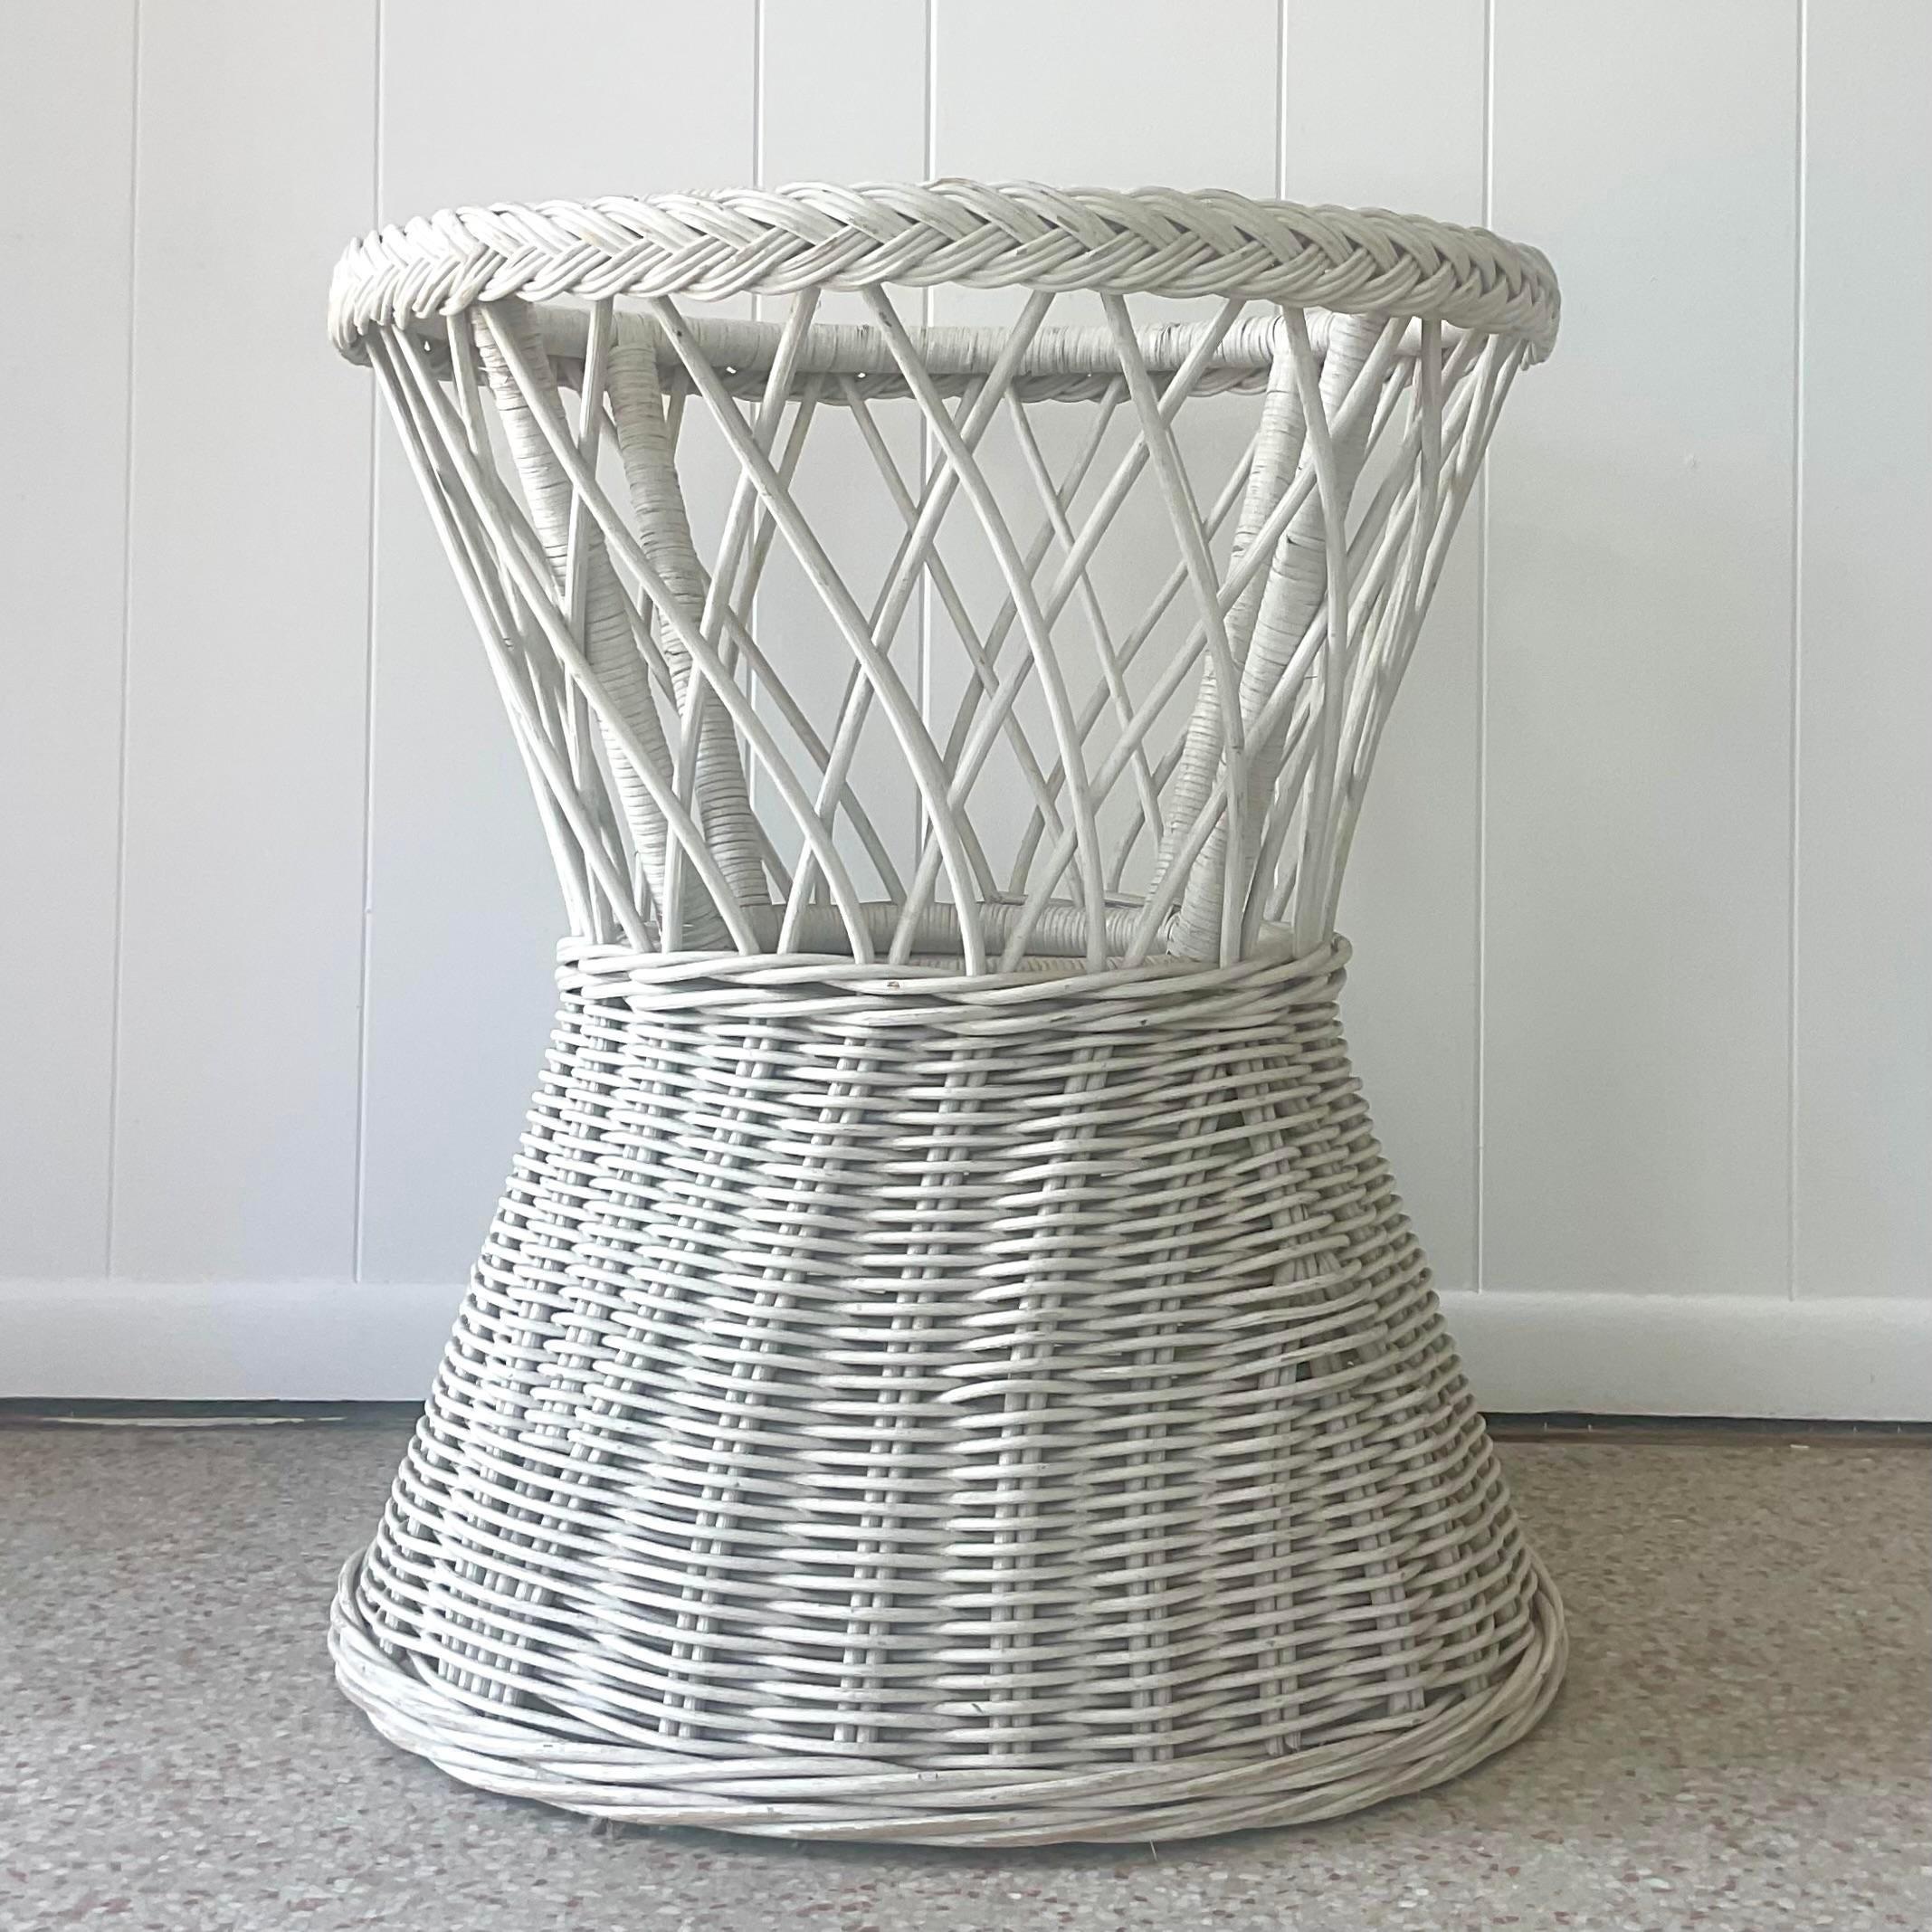 Late 20th Century Vintage Coastal Rattan Dining Table Pedestal In Good Condition For Sale In west palm beach, FL